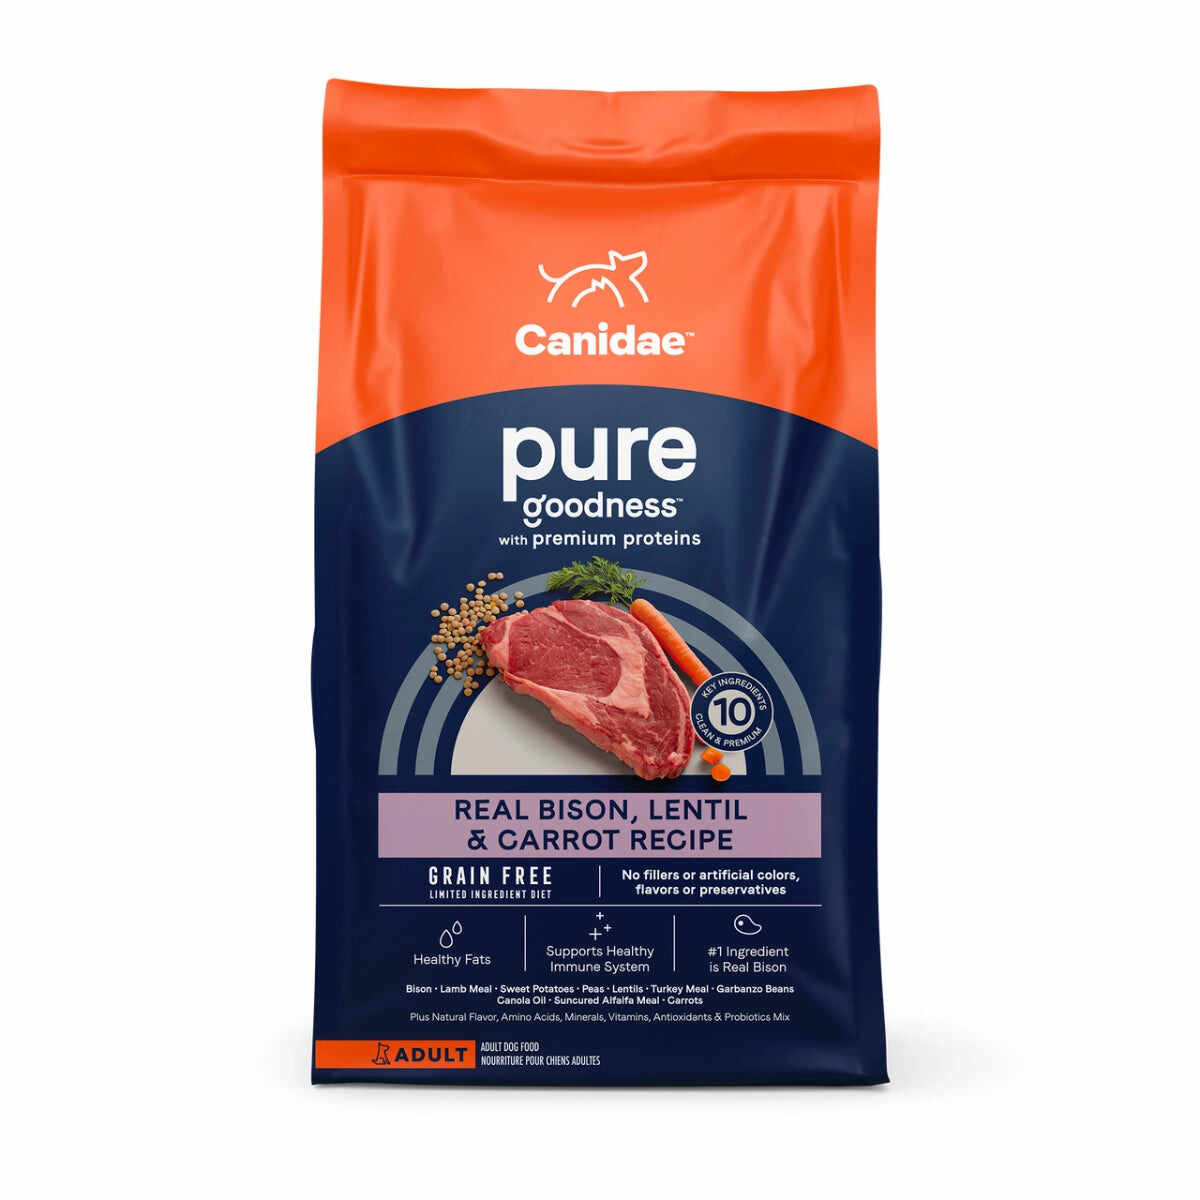 Canidae PURE Grain Free Dry Dog Food - Bison, Lentil & Carrot